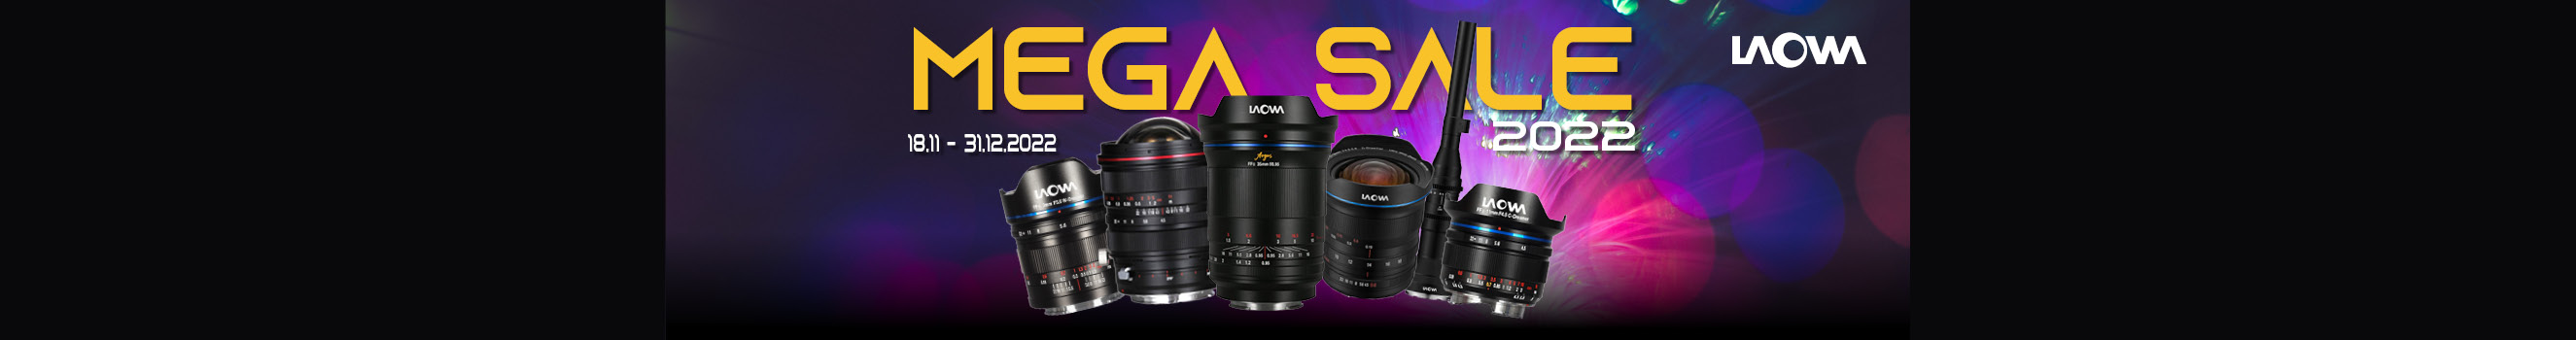  Laowa Lens Special Discount